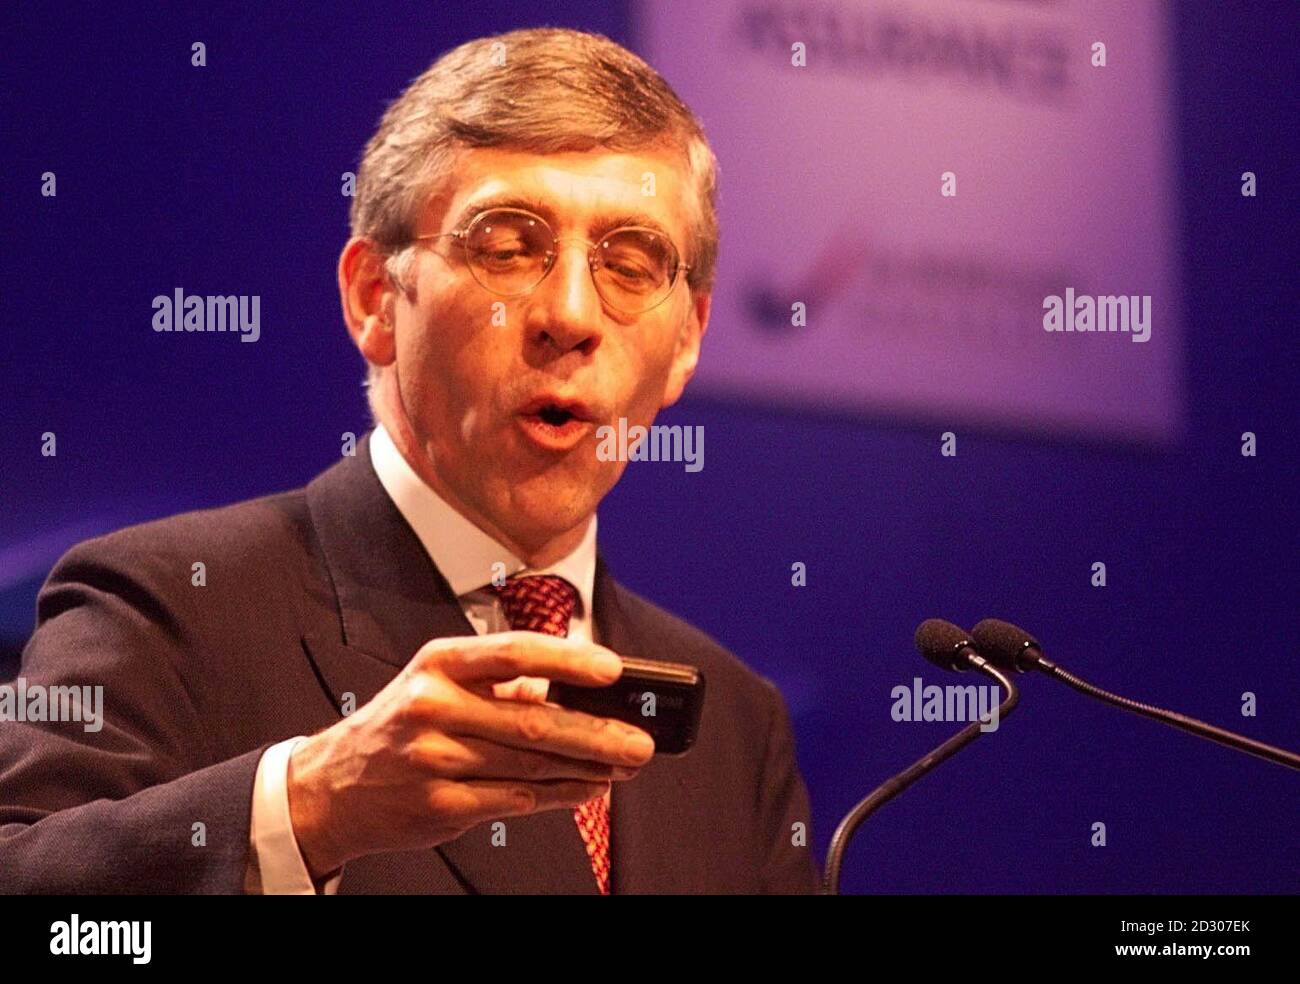 Home secretary Jack Straw, is interrupted by a pager message from the Labour party chief whip, during his address of the Police Federation Annual Conference, at the Winter Gardens, Blackpool. Stock Photo